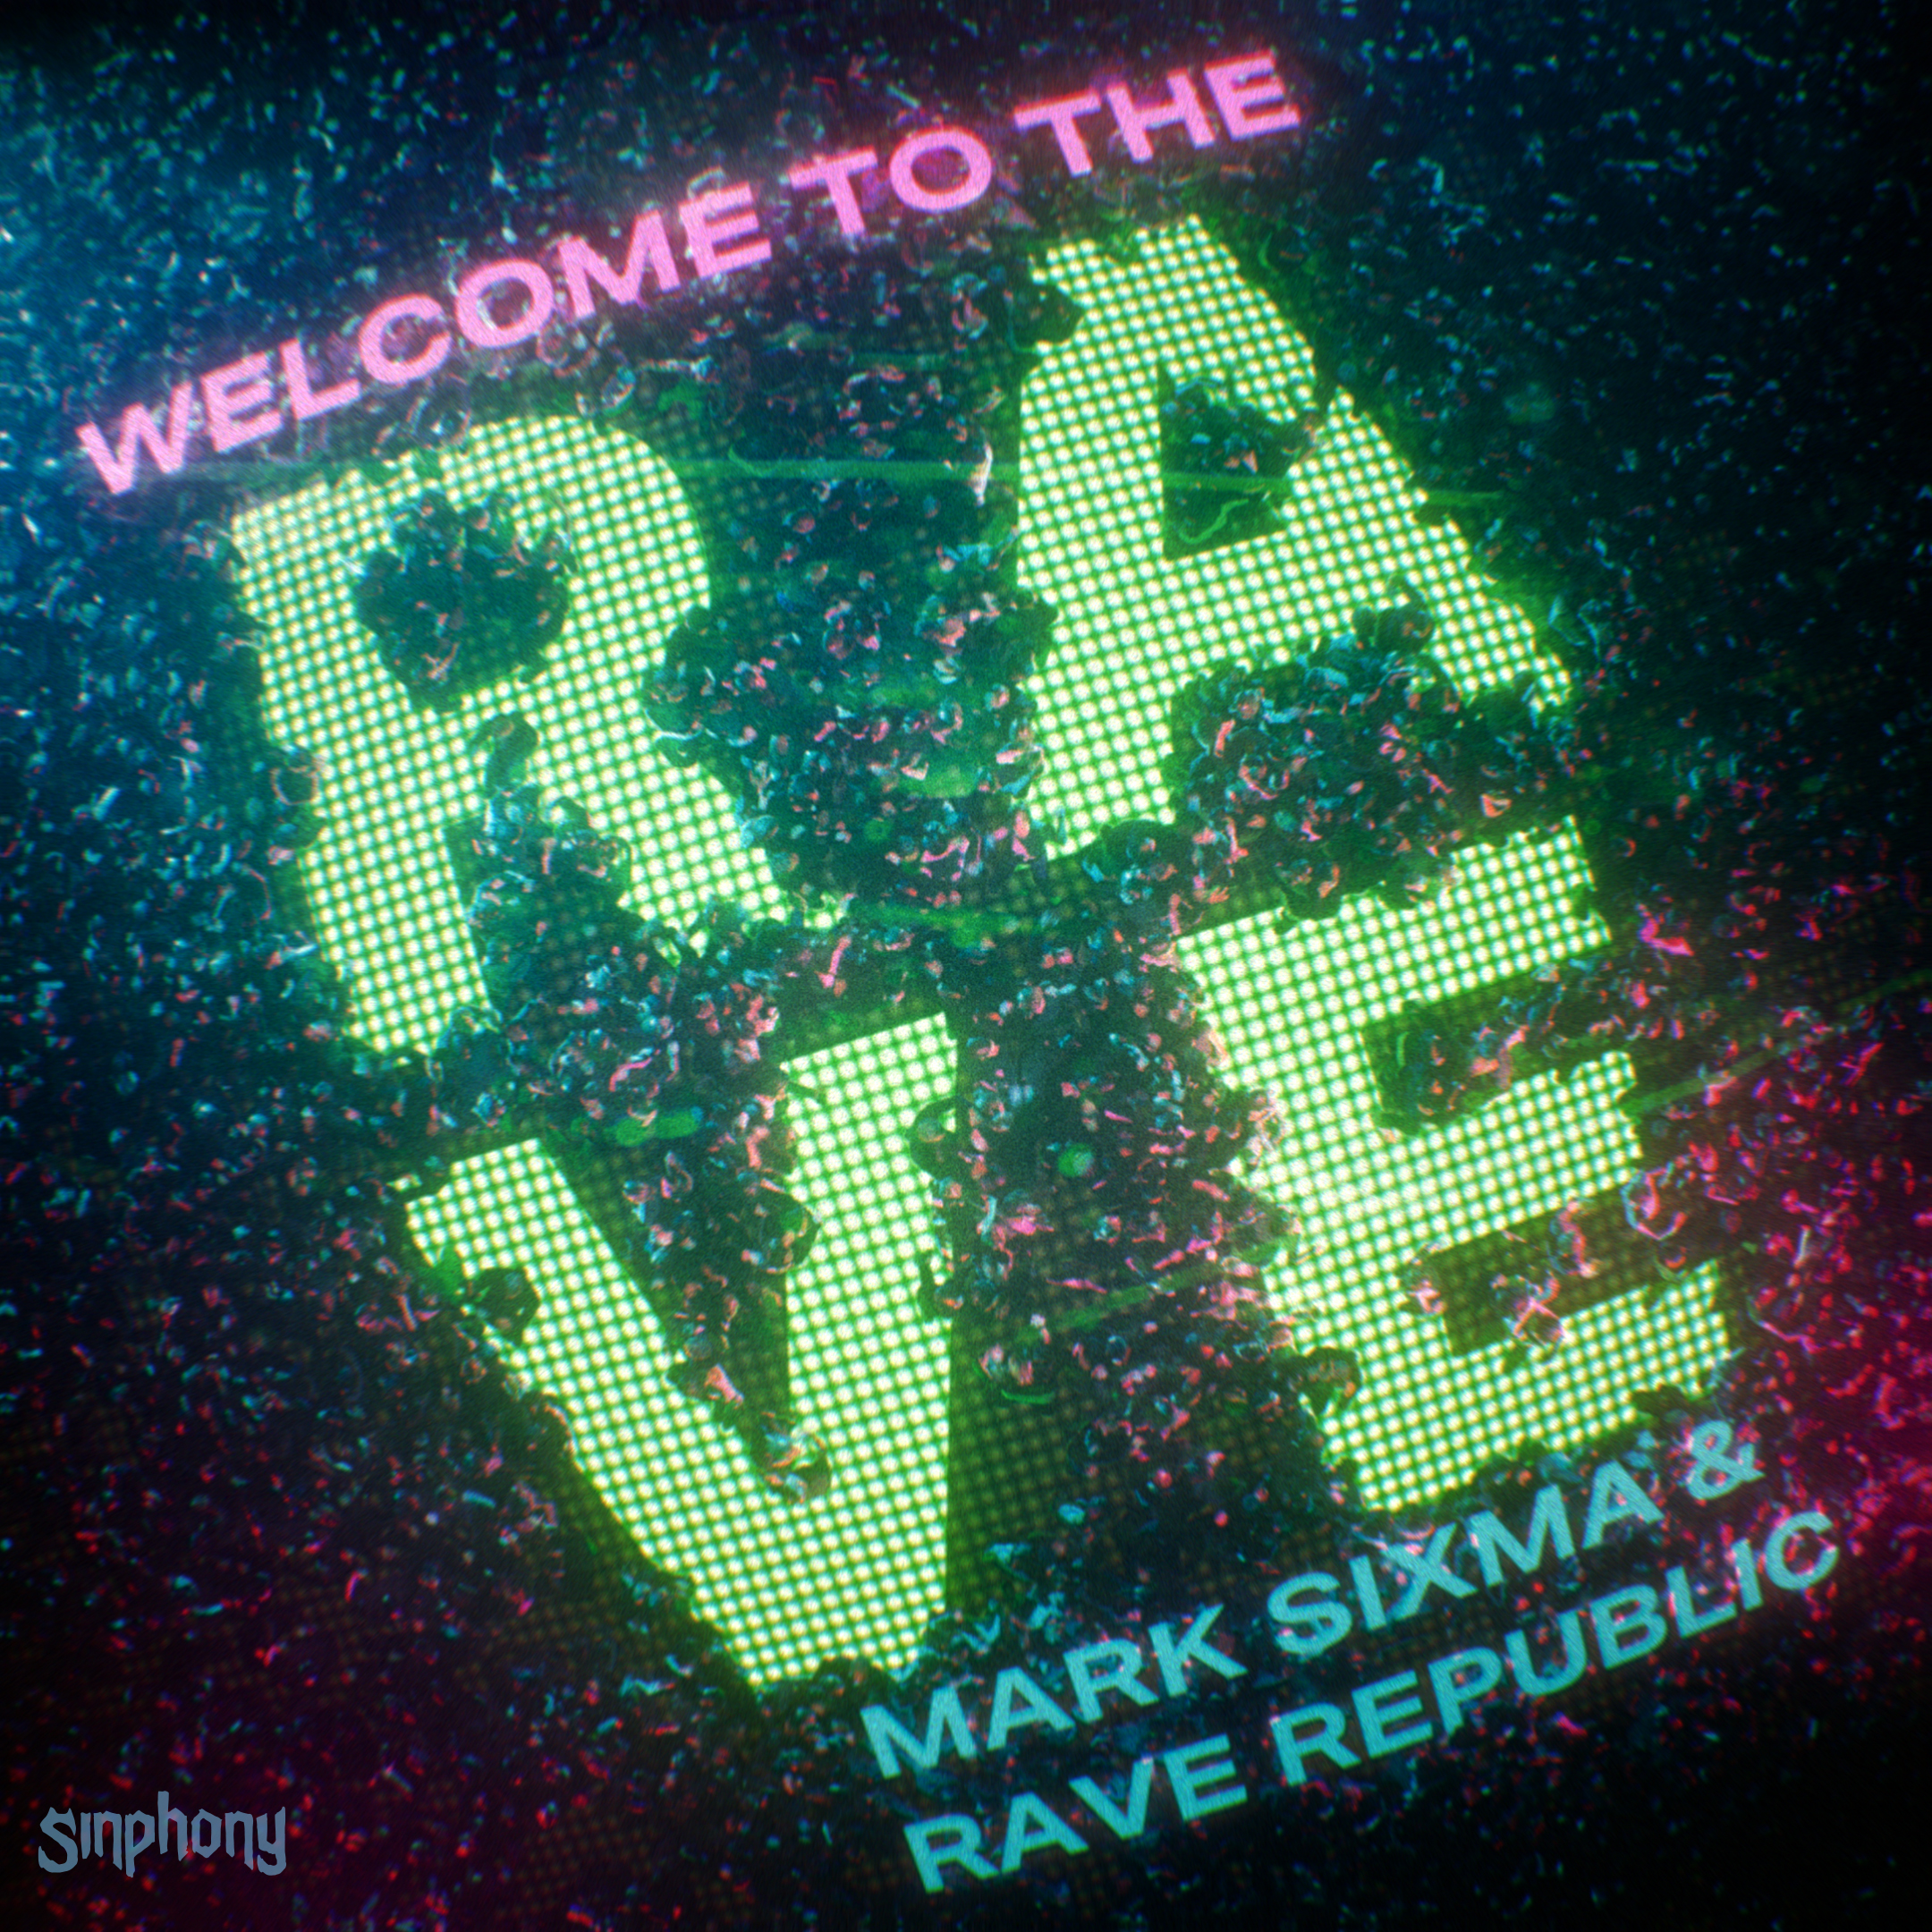 Mark Sixma & Rave Republic Welcome To The Rave cover artwork